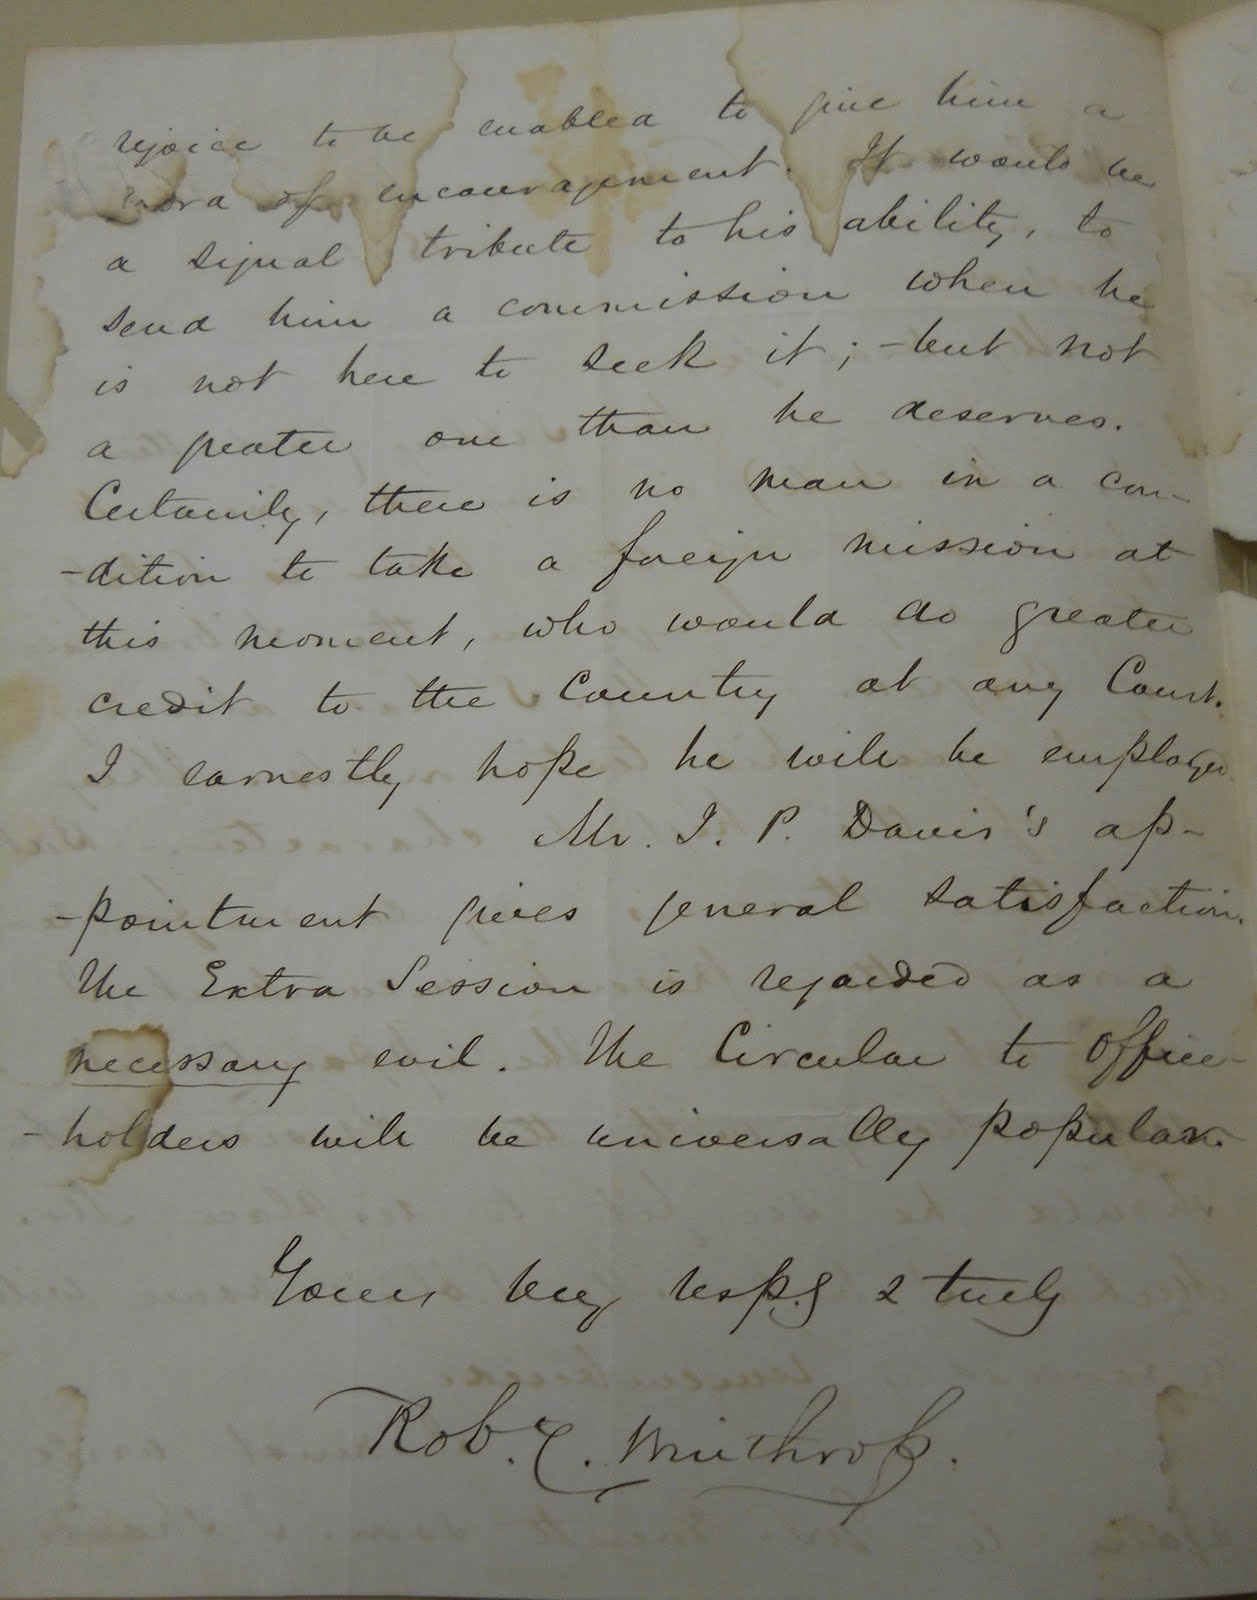 Last page of a handwritten letter to Daniel Webster from Congressman Robert Winthrop, with signature.